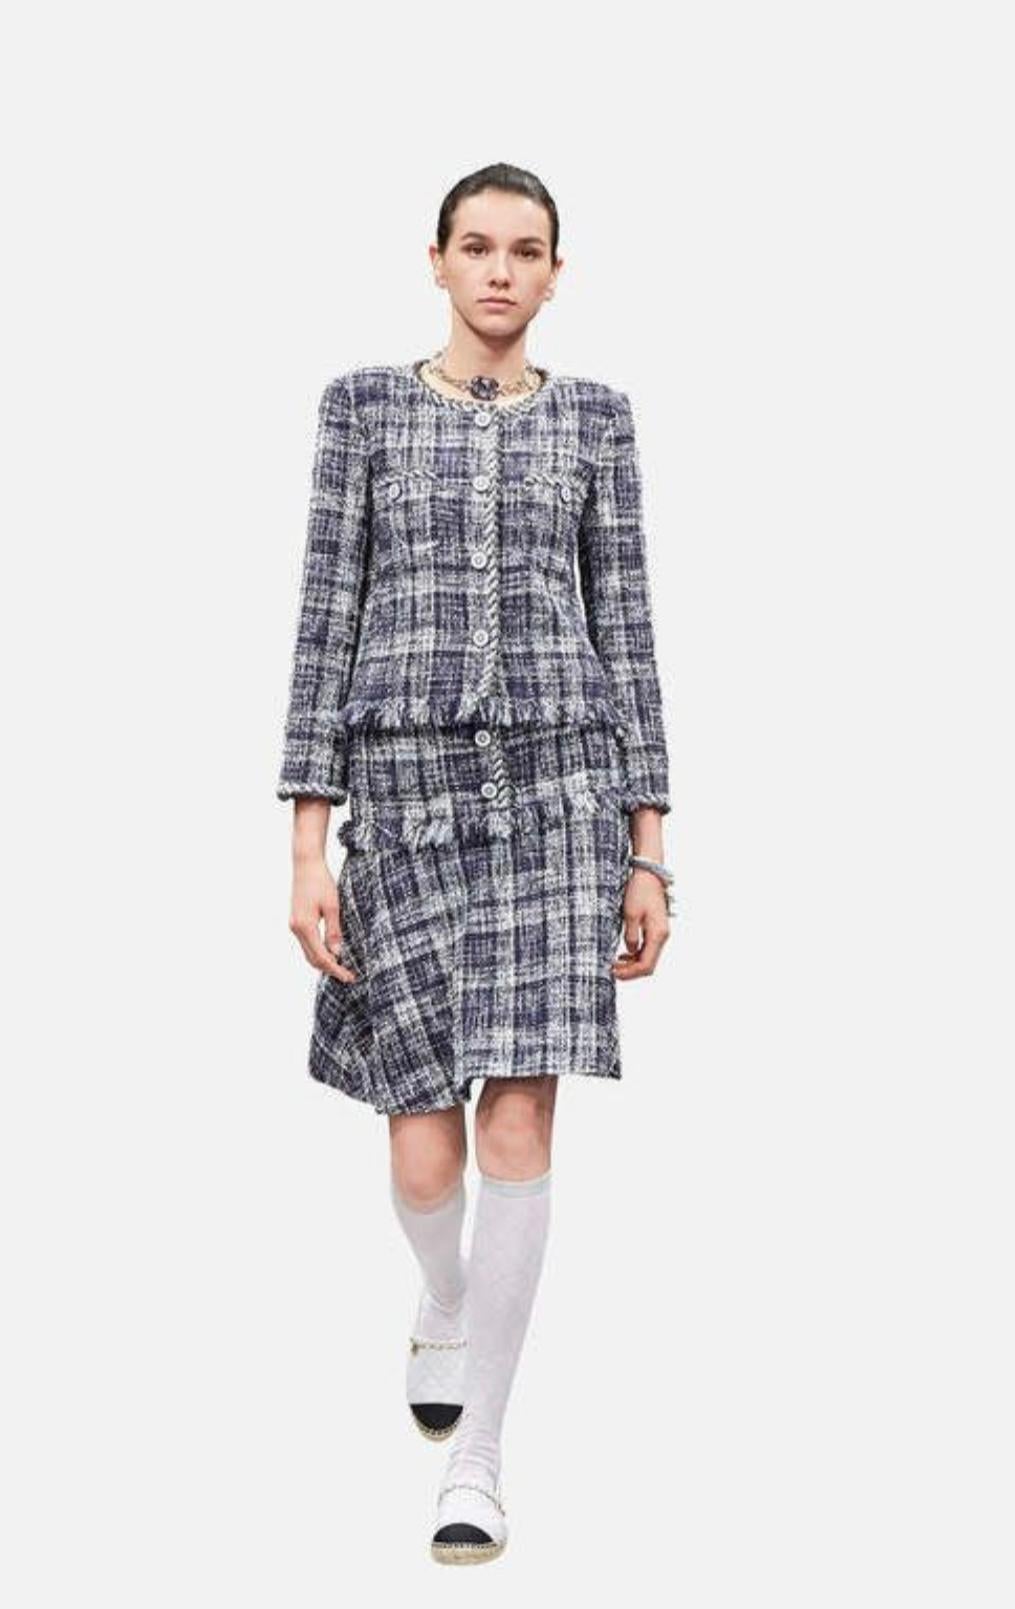 Famous Chanel navy tweed skirt from 2018 spring collection, made of navy and white lesage tweed
As seen on many celebs and fashionistas!
Size mark  42 fr. Condition is pristine

